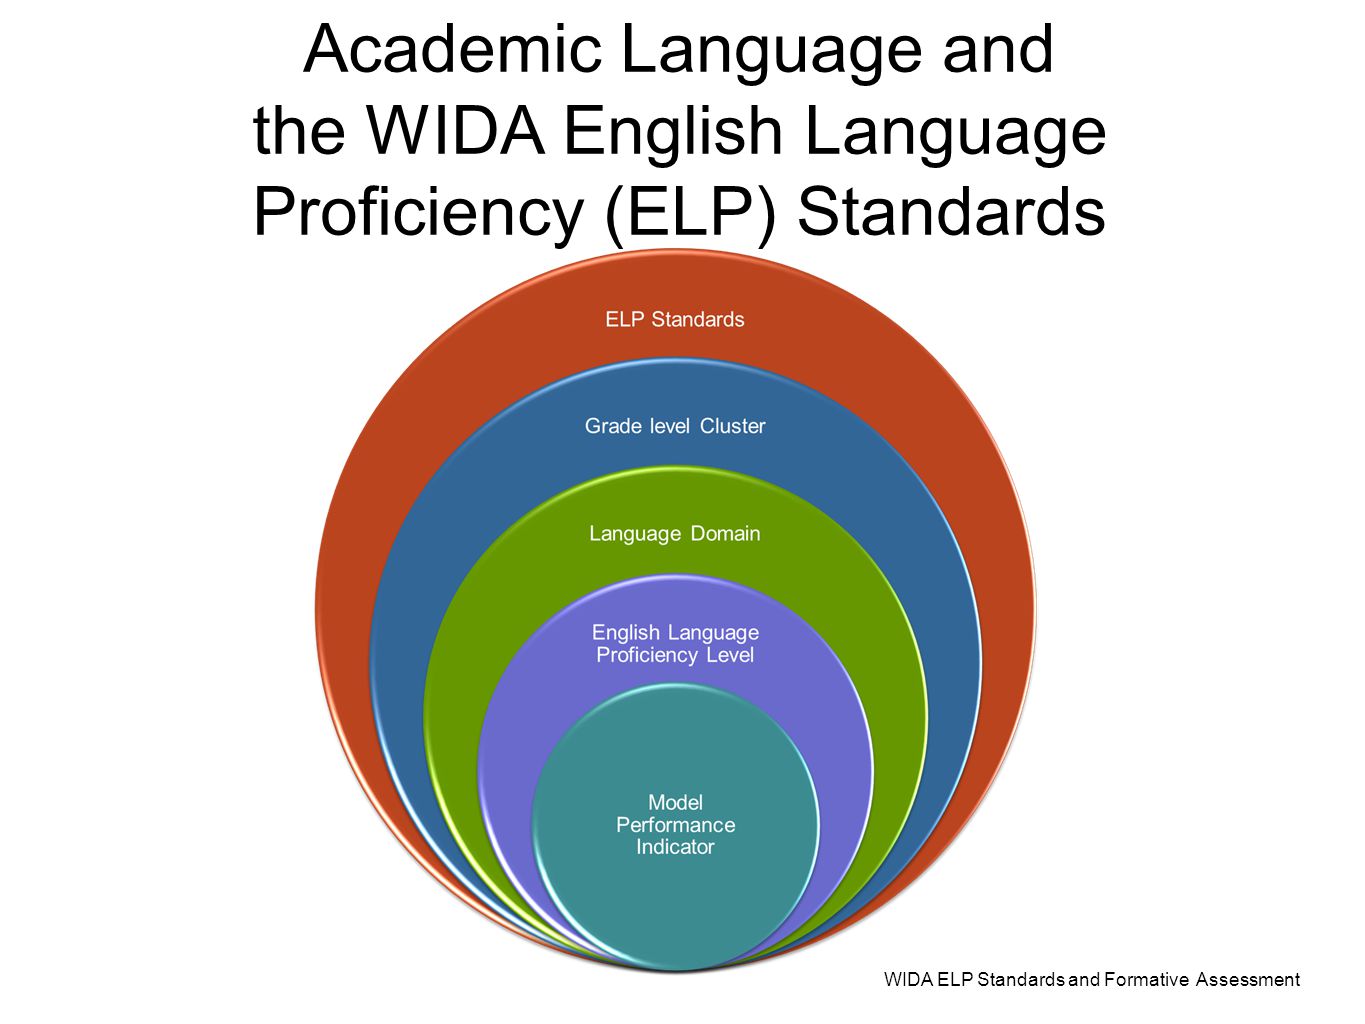 WIDA ELP Standards and Formative Assessment